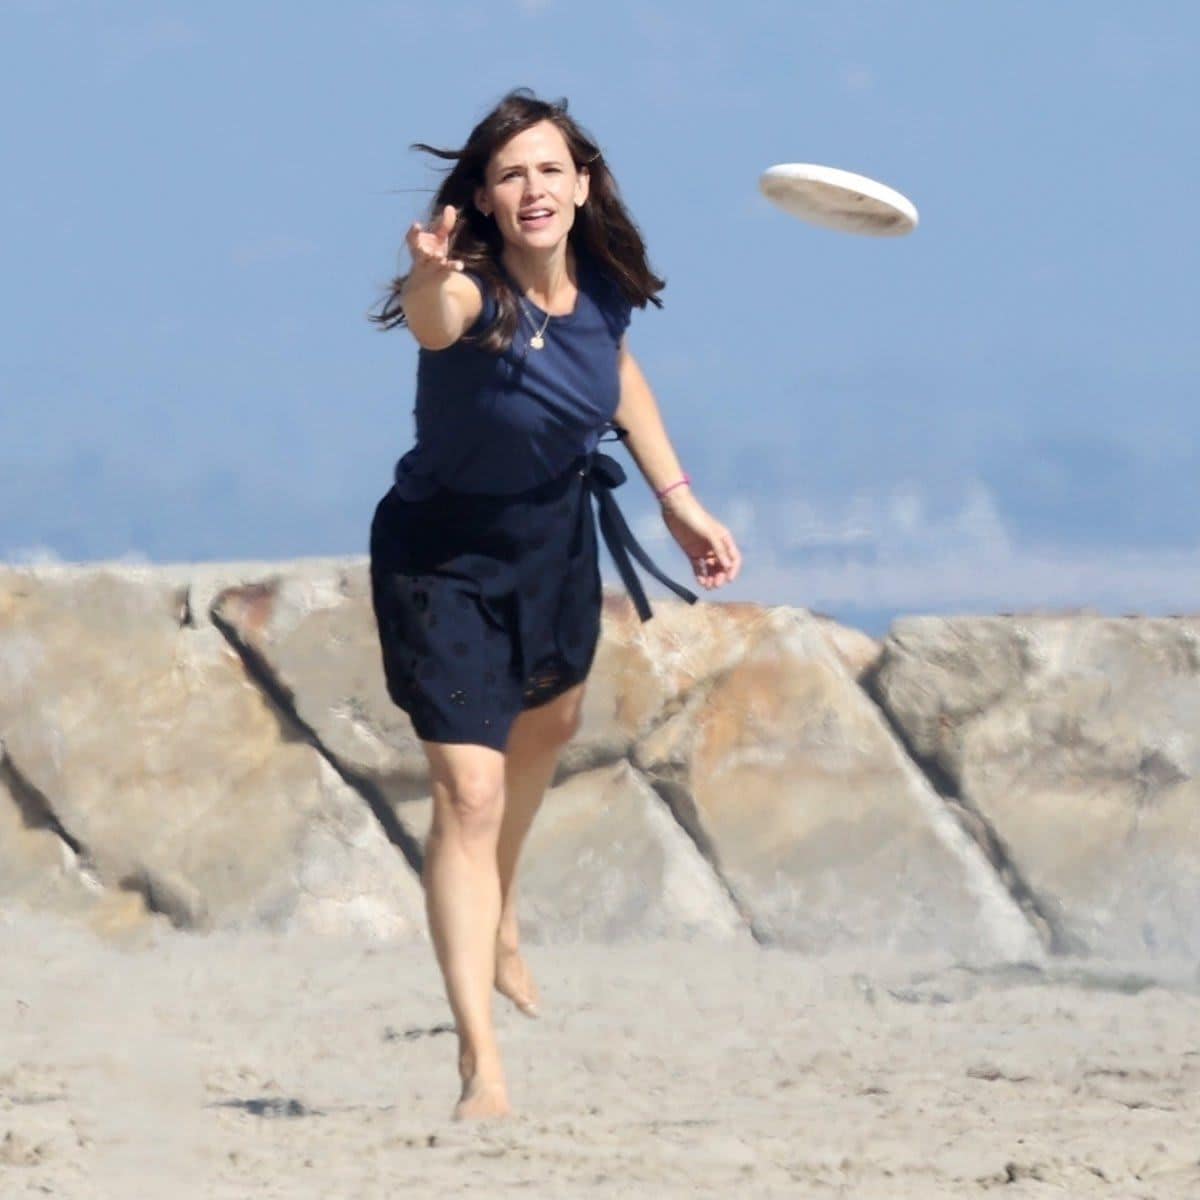 Jennifer Garner creates memories with her kids in a fun family photo shoot at the beach